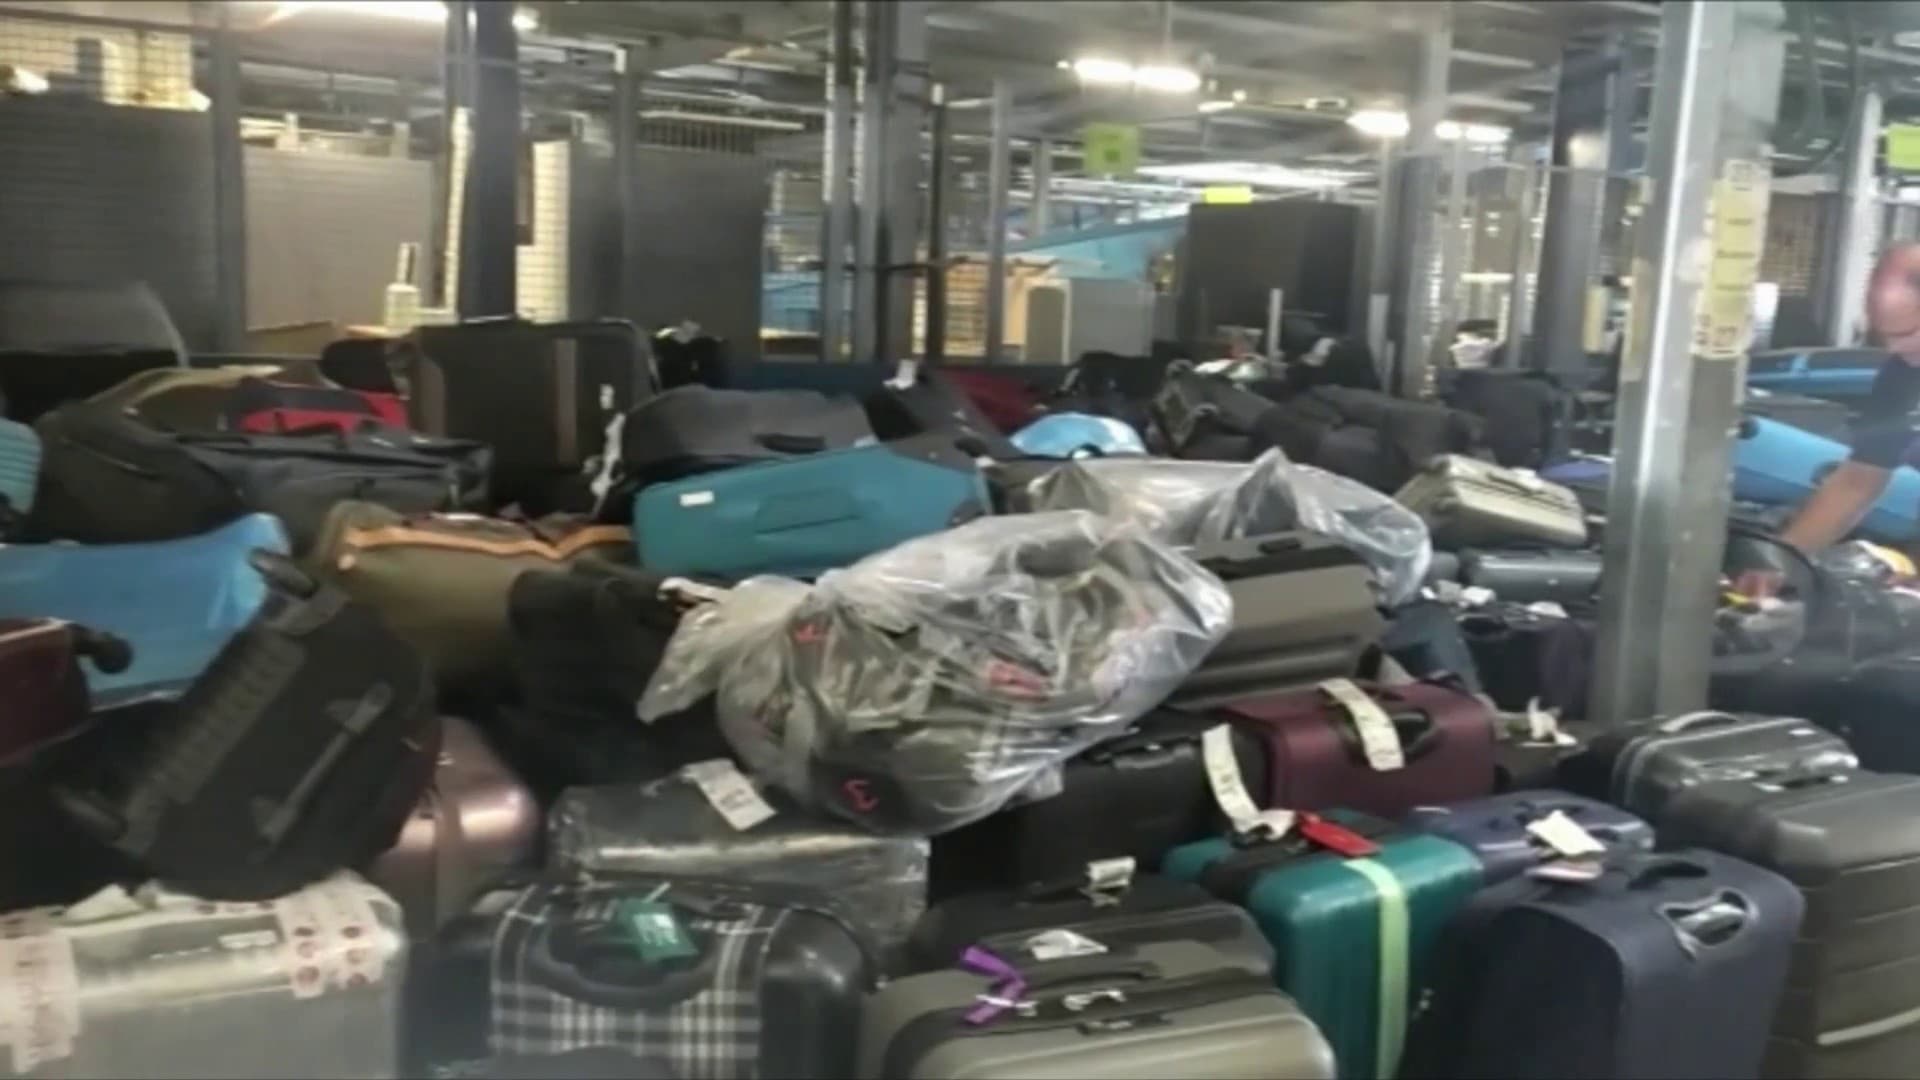 According to the unions, nearly 20,000 pieces of luggage were lost